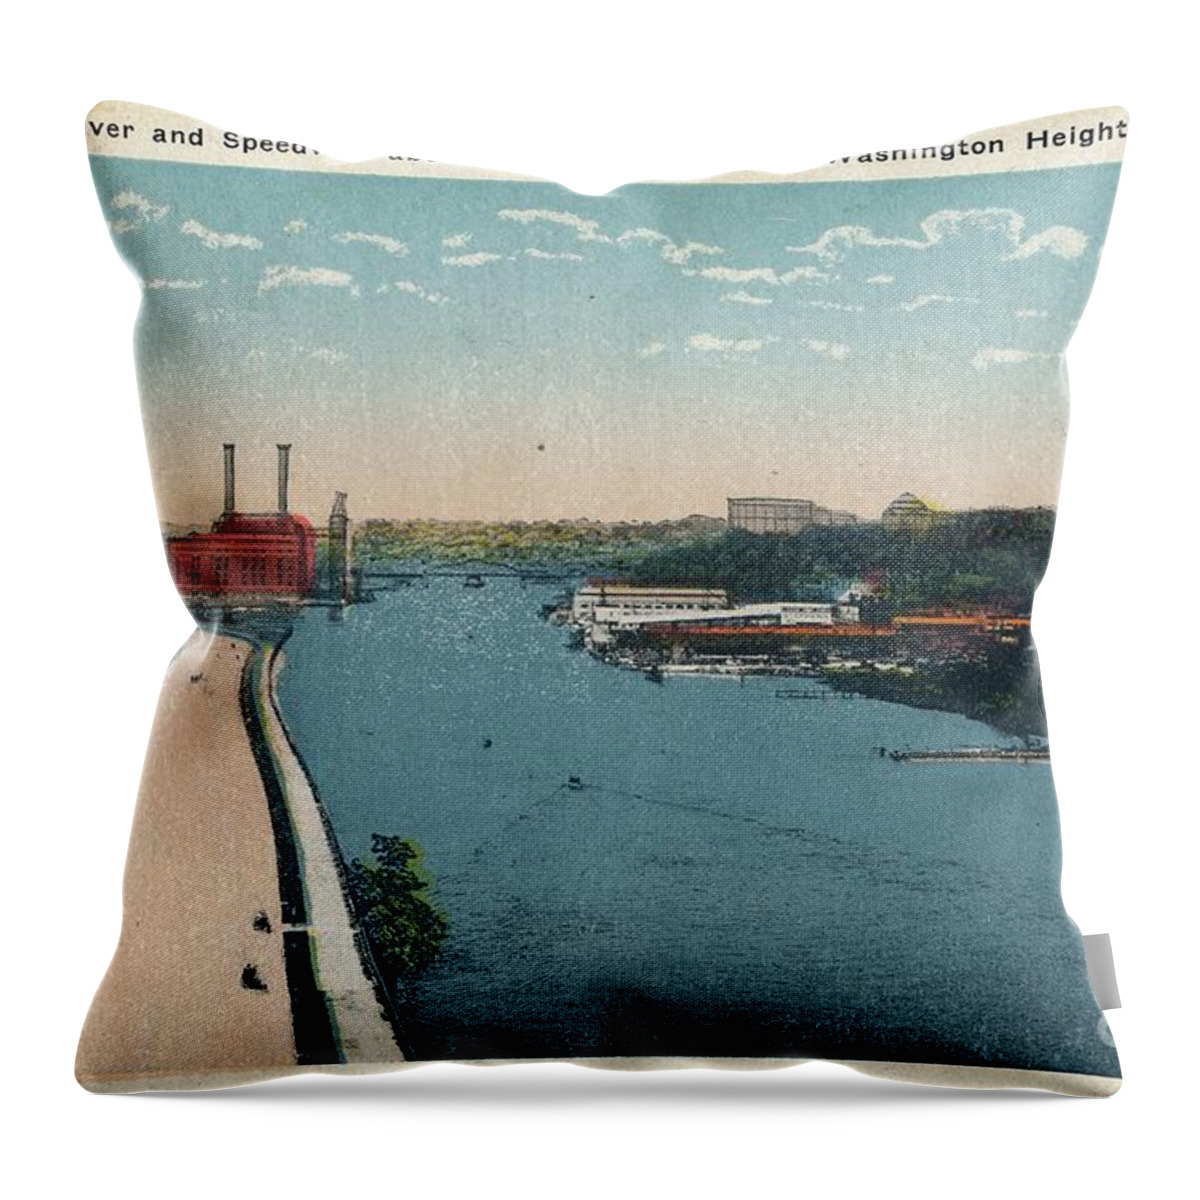 Harlem River Throw Pillow featuring the photograph Harlem River Speedway by Cole Thompson